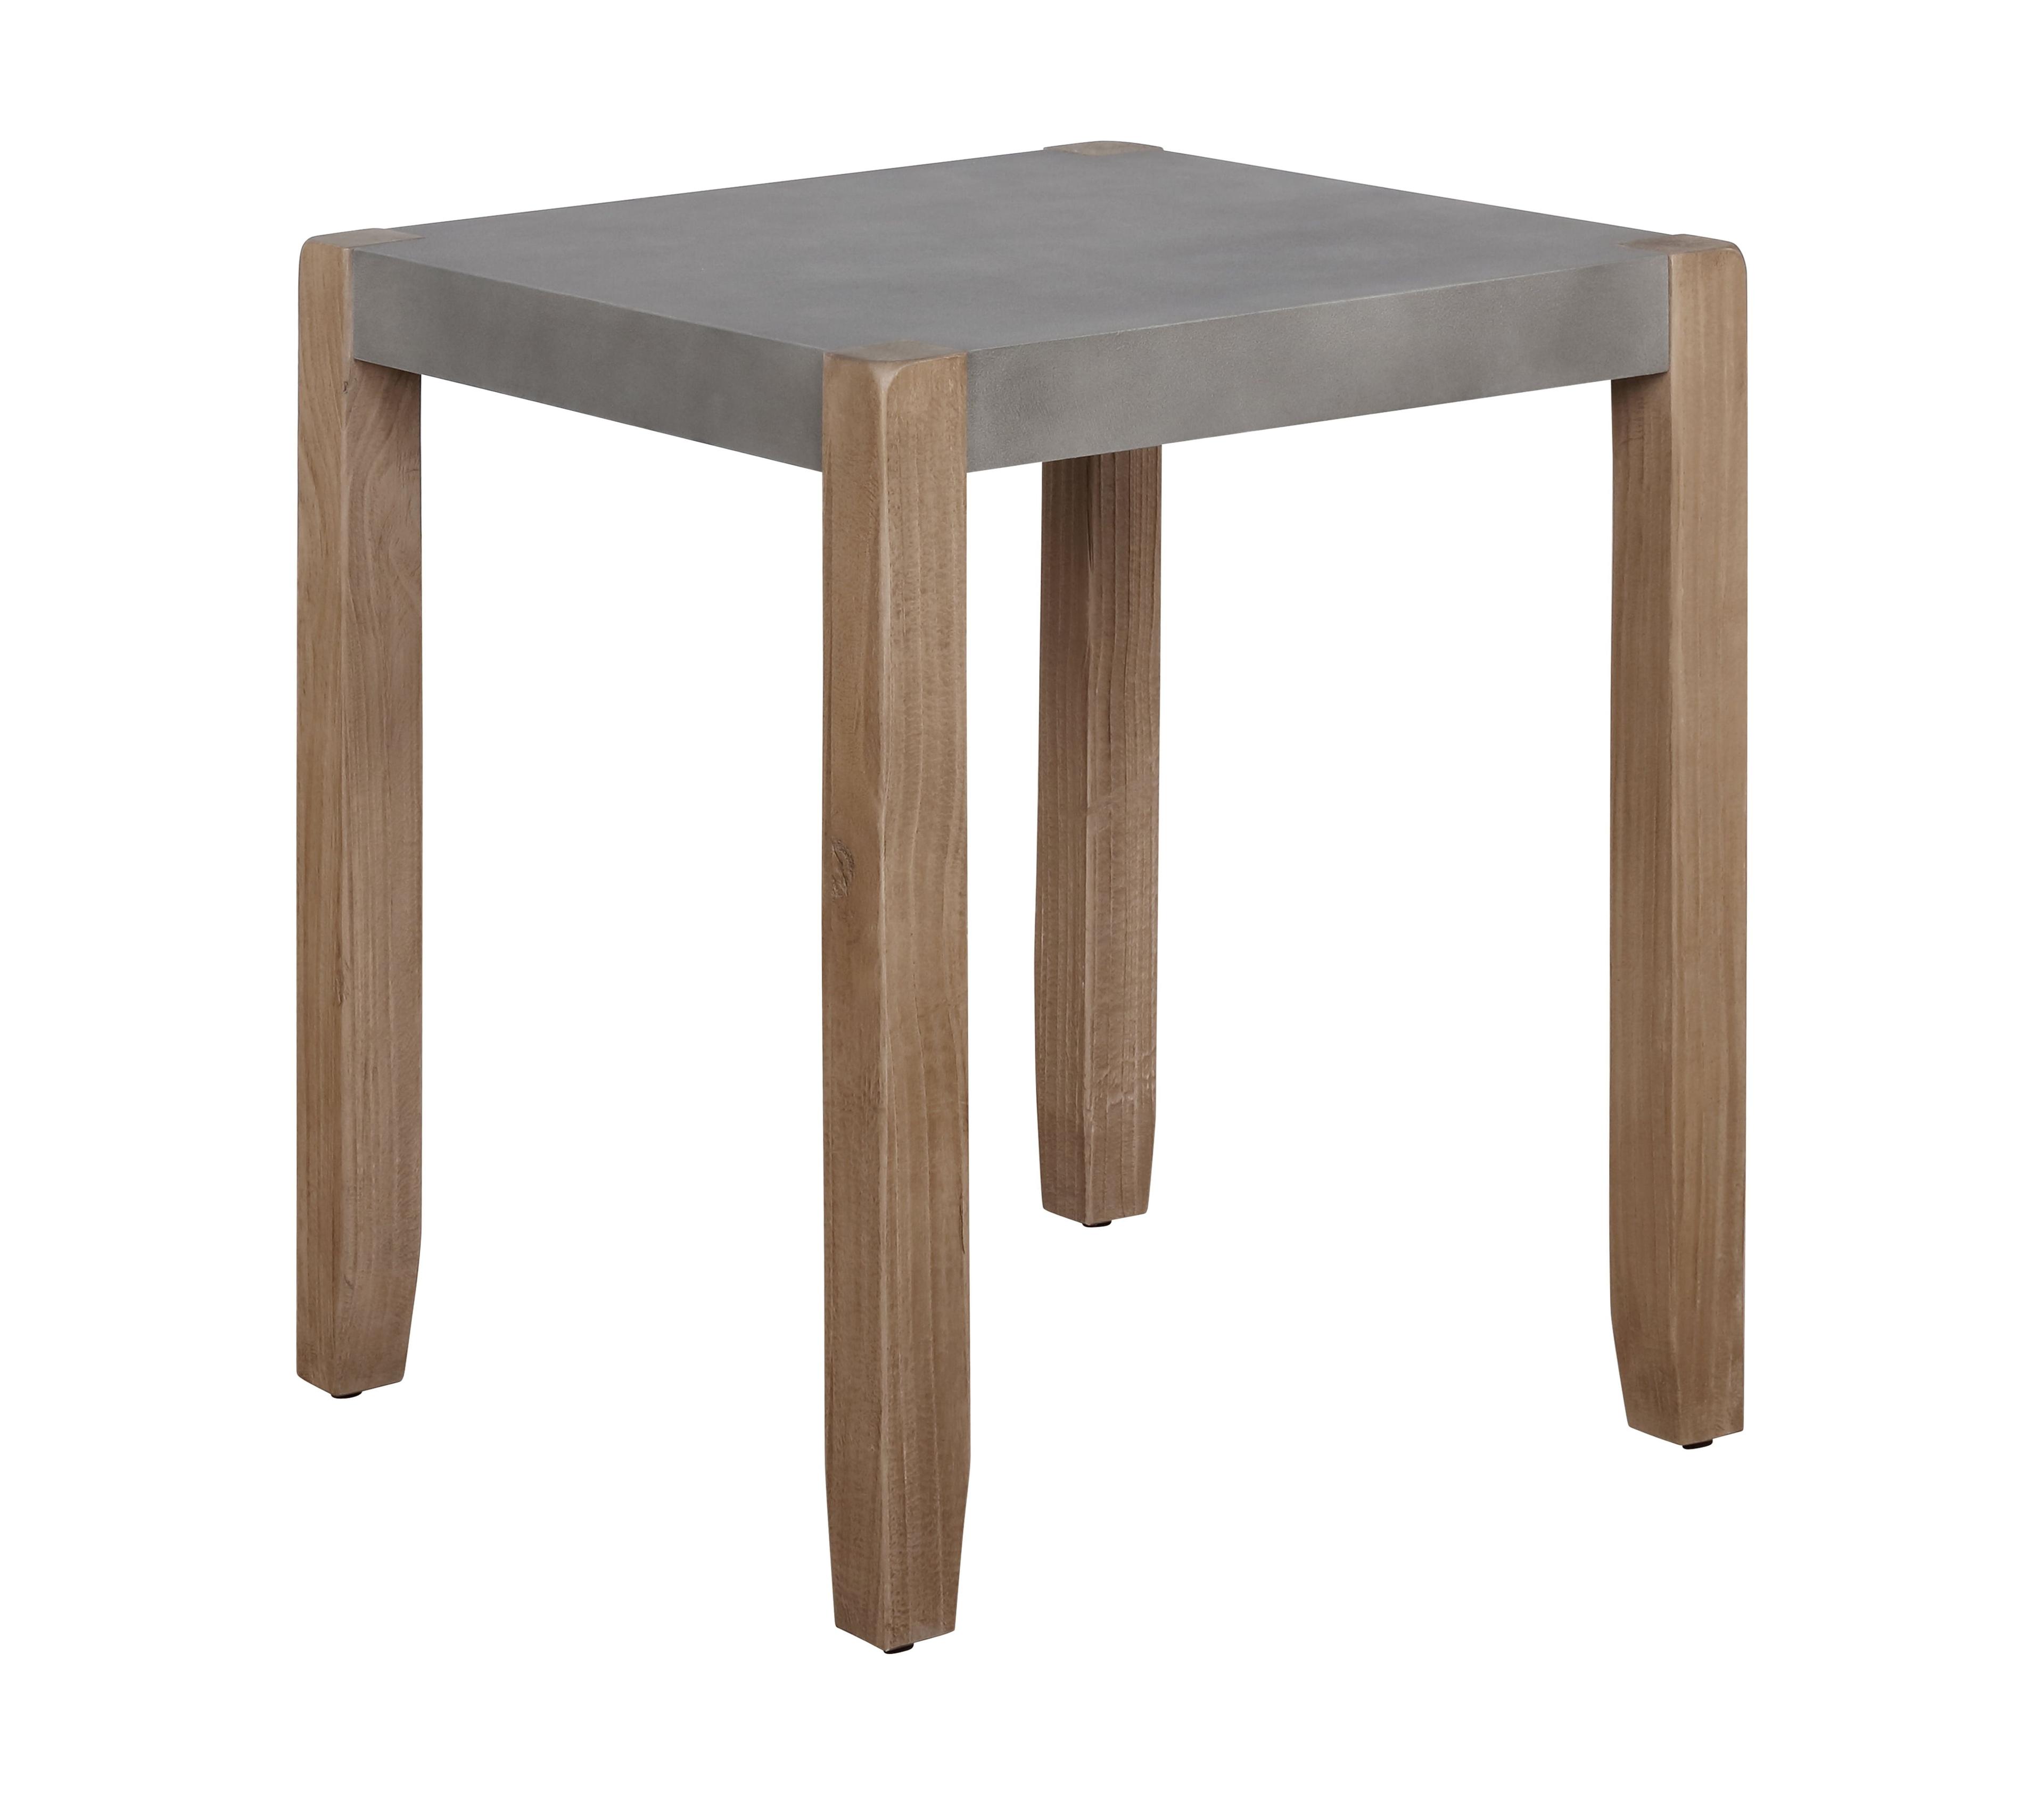 Rustic Faux Concrete and Light Amber Wood Square End Table